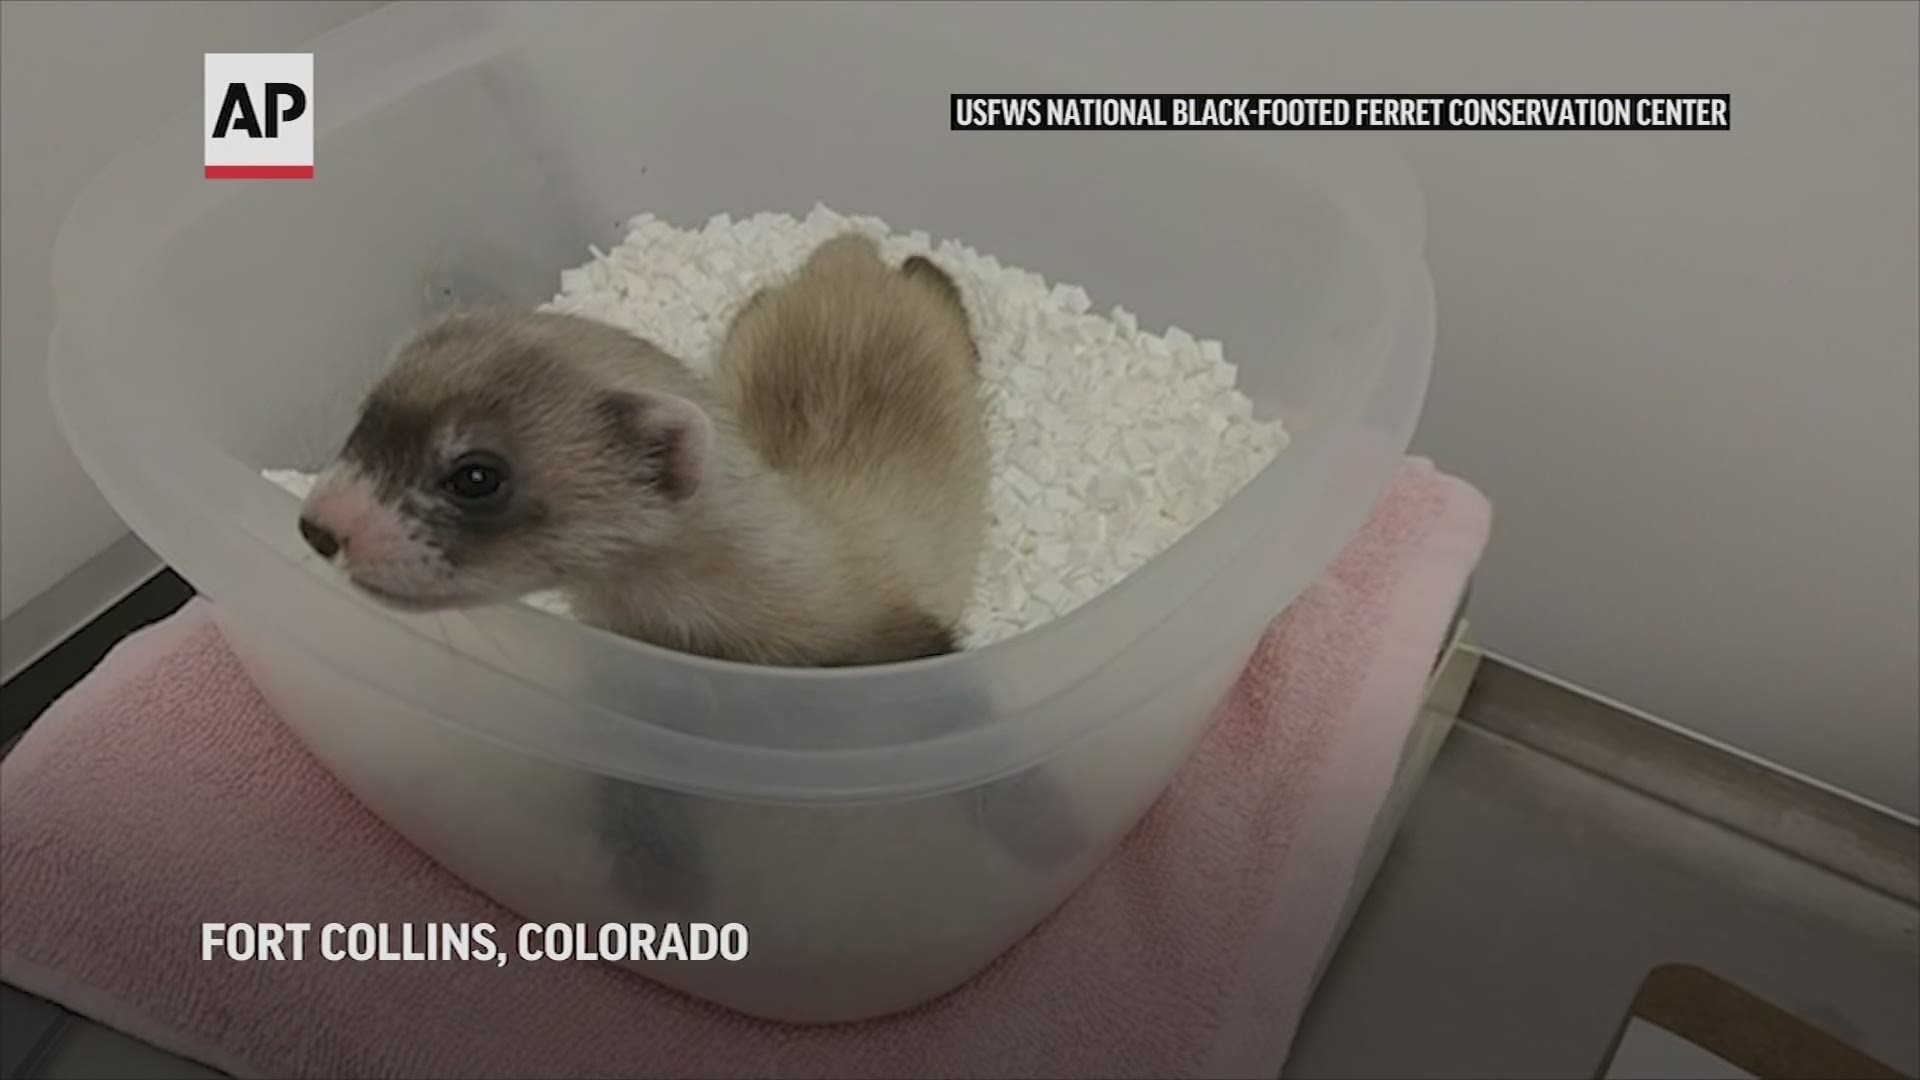 Scientists have cloned the first U.S. endangered species, a black-footed ferret duplicated from the genes of an animal that died over 30 years ago.